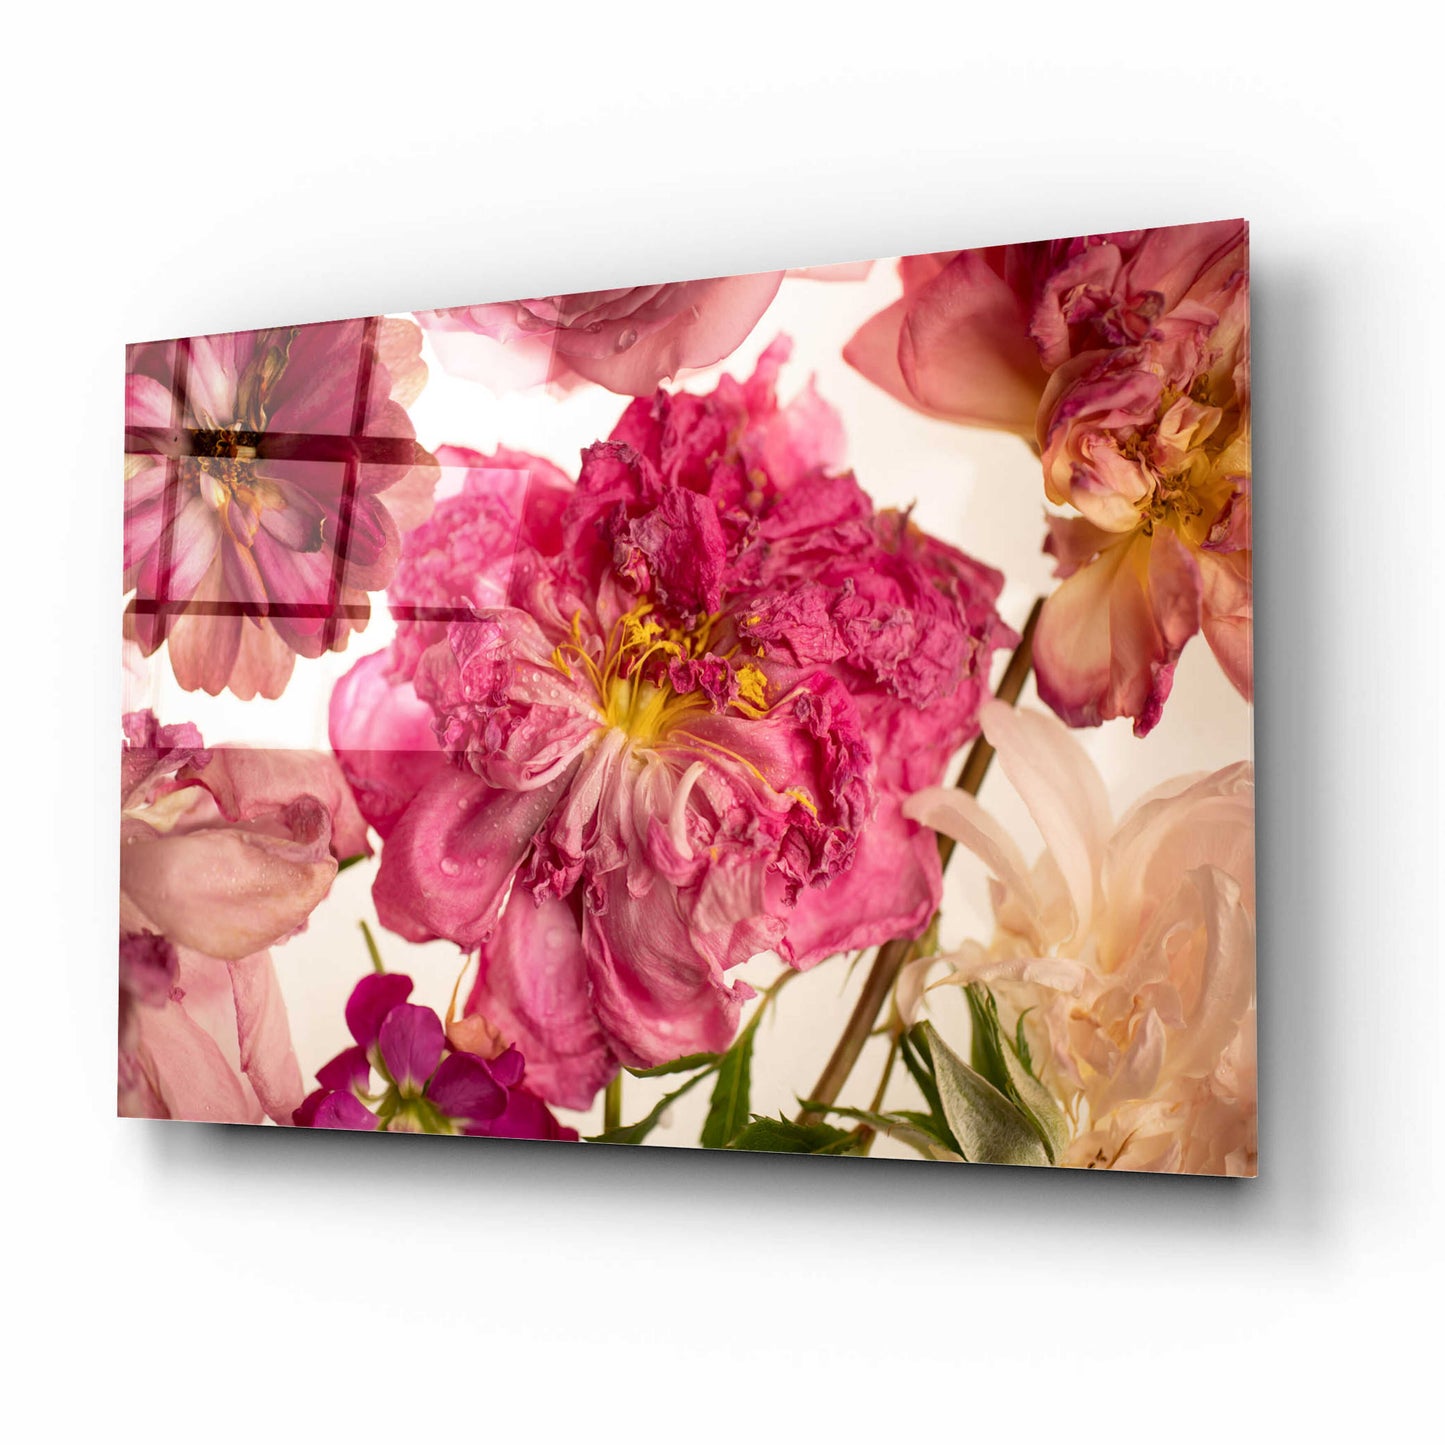 Epic Art 'Peony on White' by Leah McLean, Acrylic Glass Wall Art,16x12